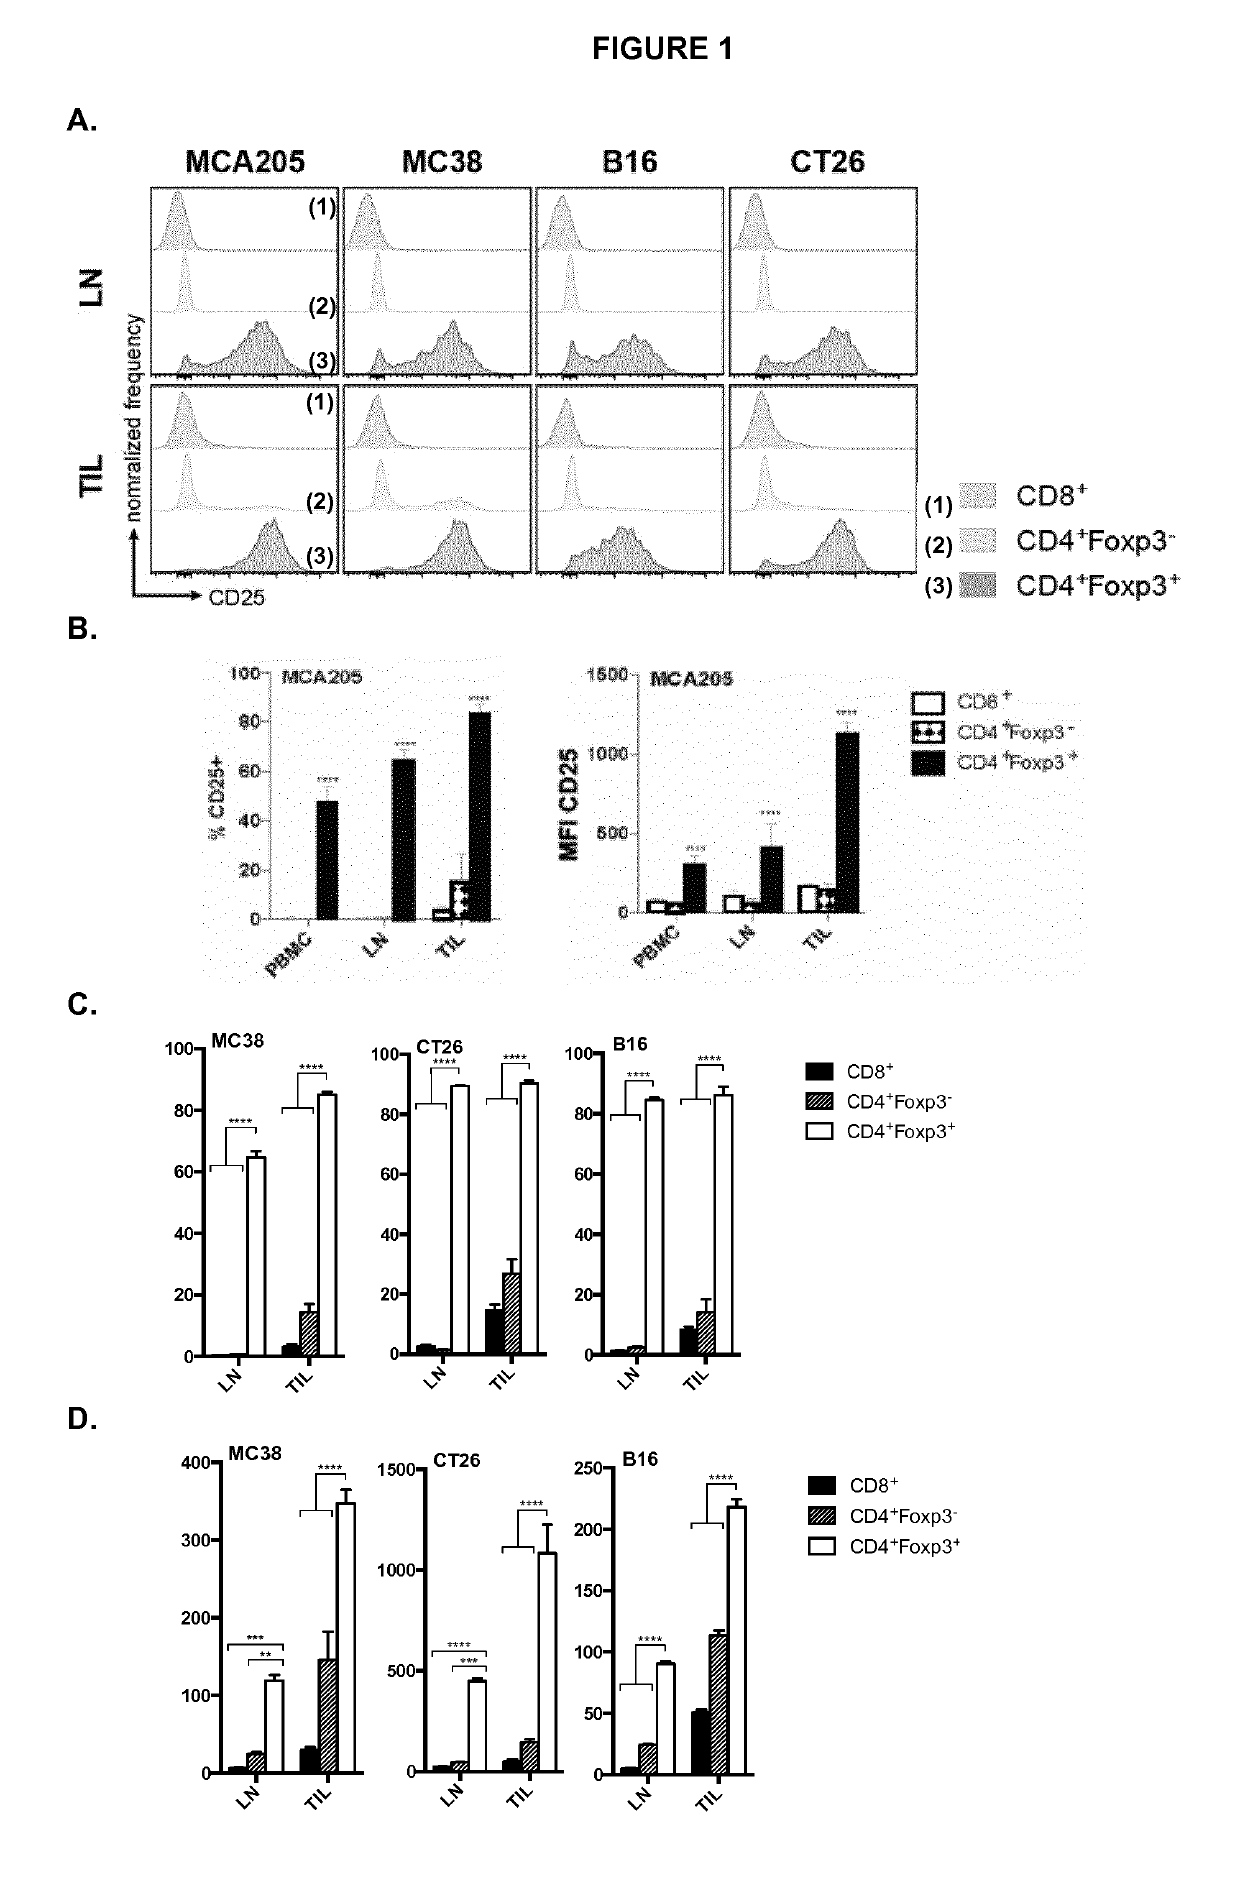 Anti cd25 fc gamma receptor bispecific antibodies for tumor specific cell depletion